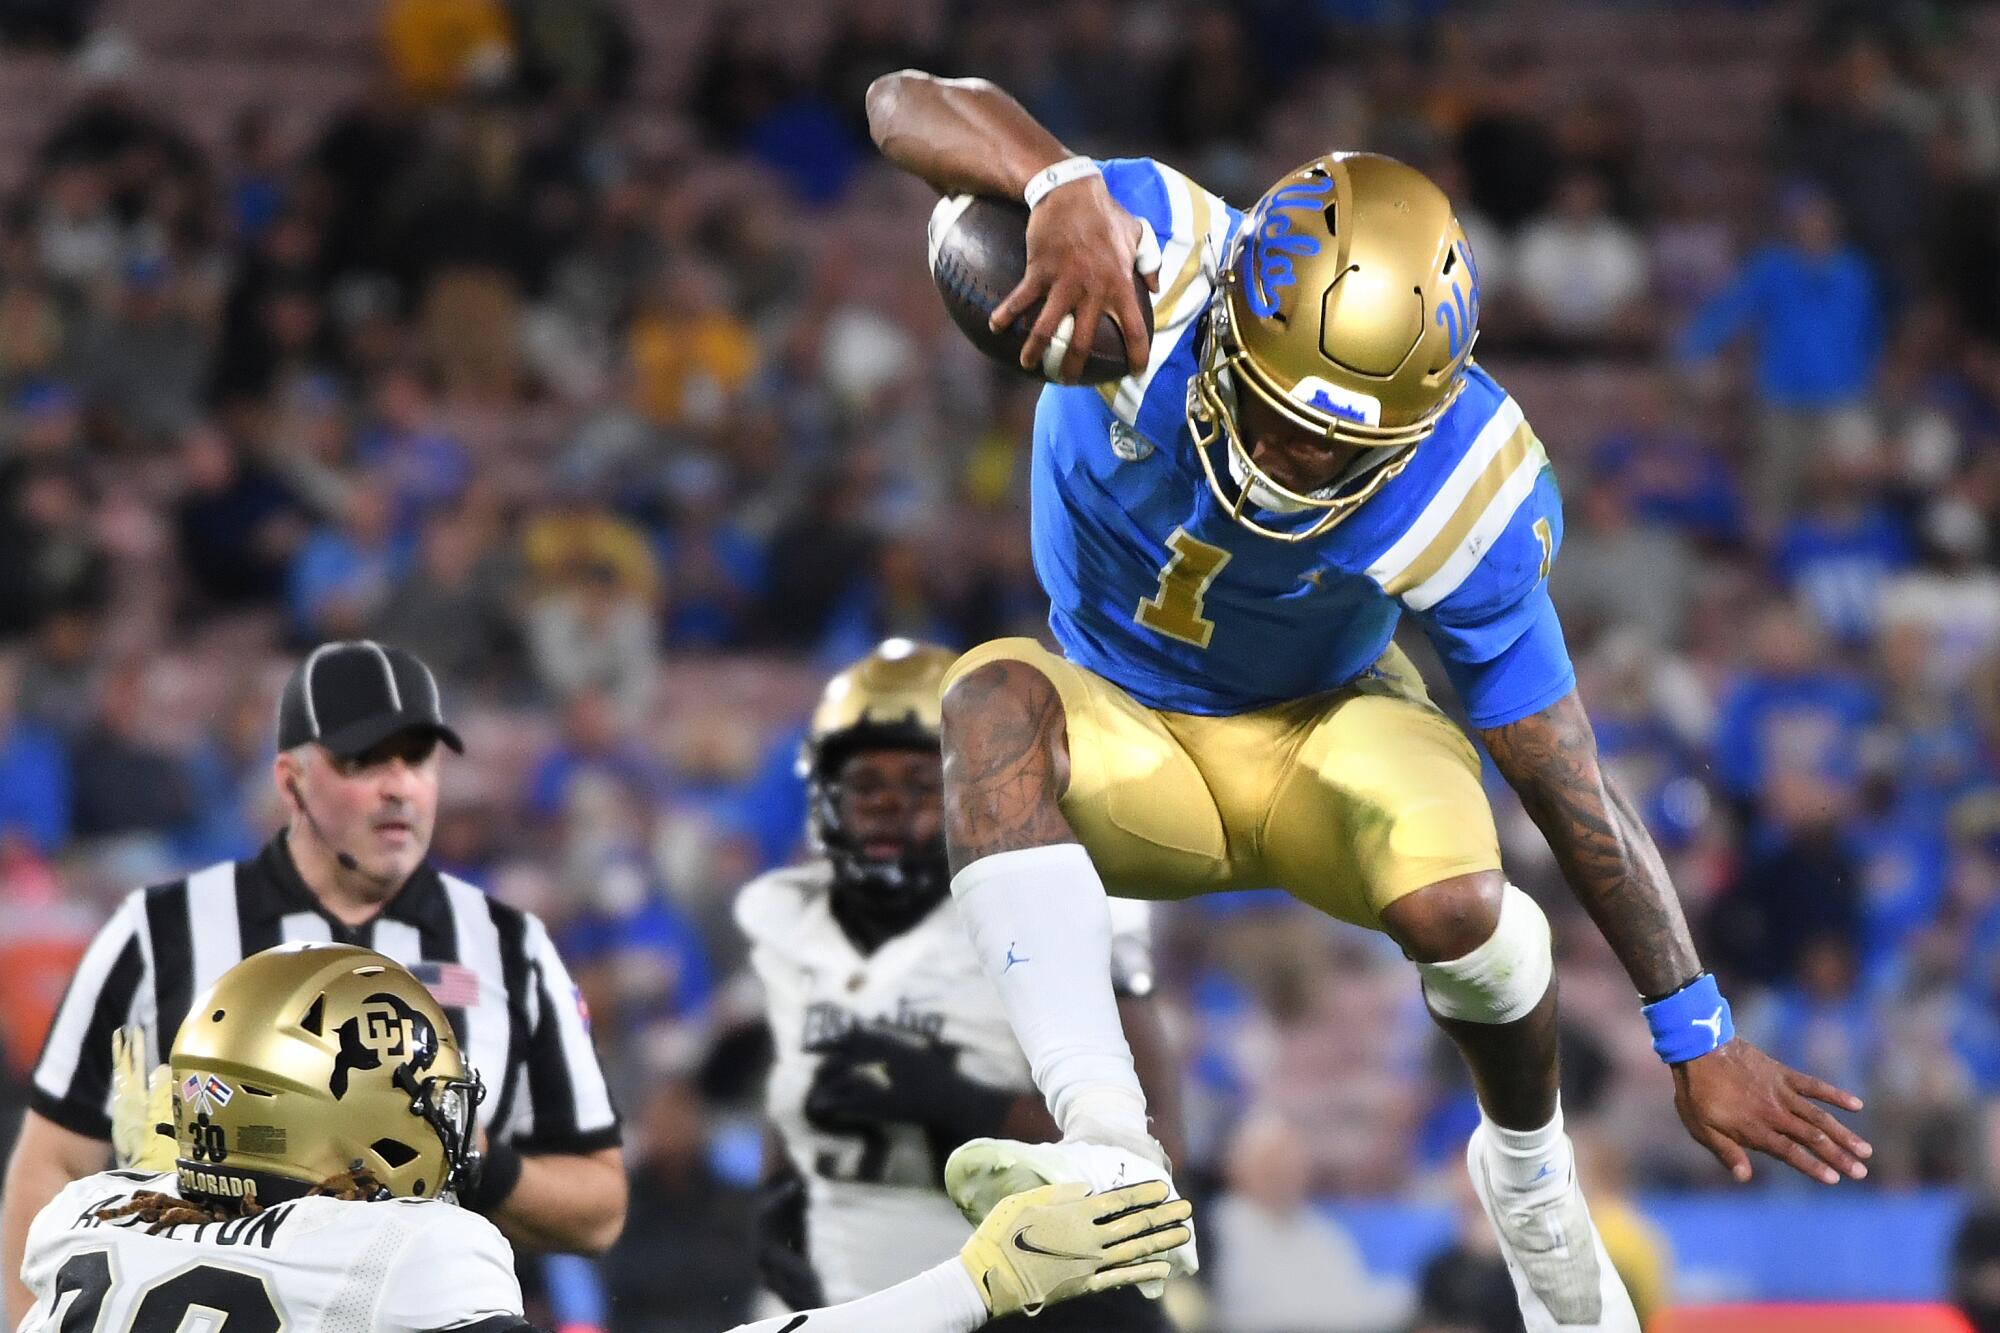 UCLA's Dorian Thompson-Robinson leaps over Colorado's Curtis Appleton and the Bruins are dominating the second half. 